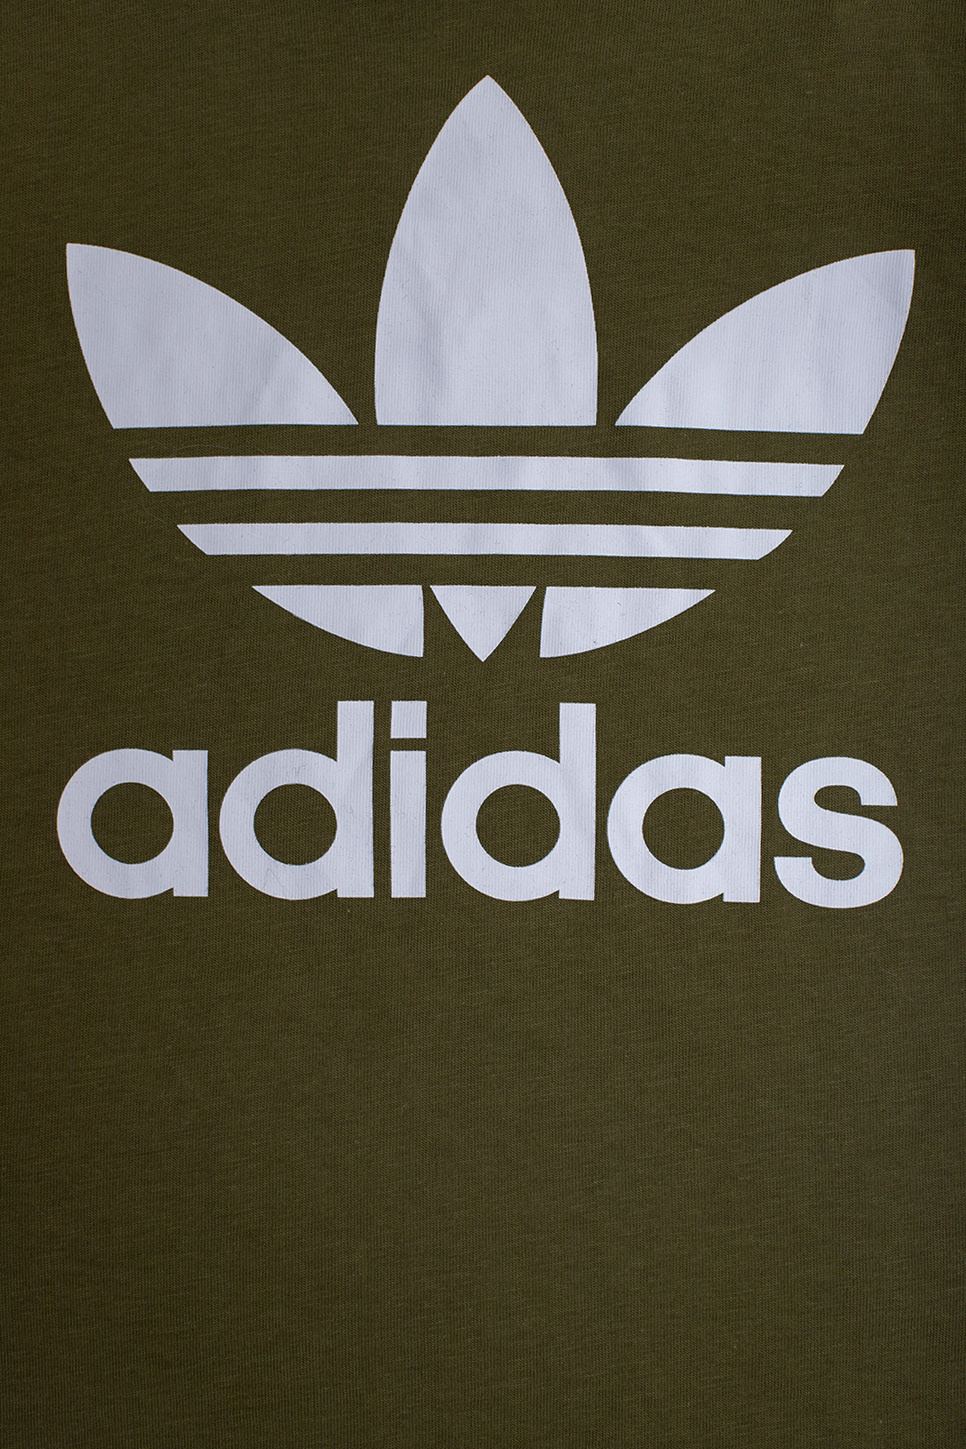 14 years) - shirt - Kids's clothes (4 - ruvilla yeezy twitter site for sale | StclaircomoShops ADIDAS Kids Logo T